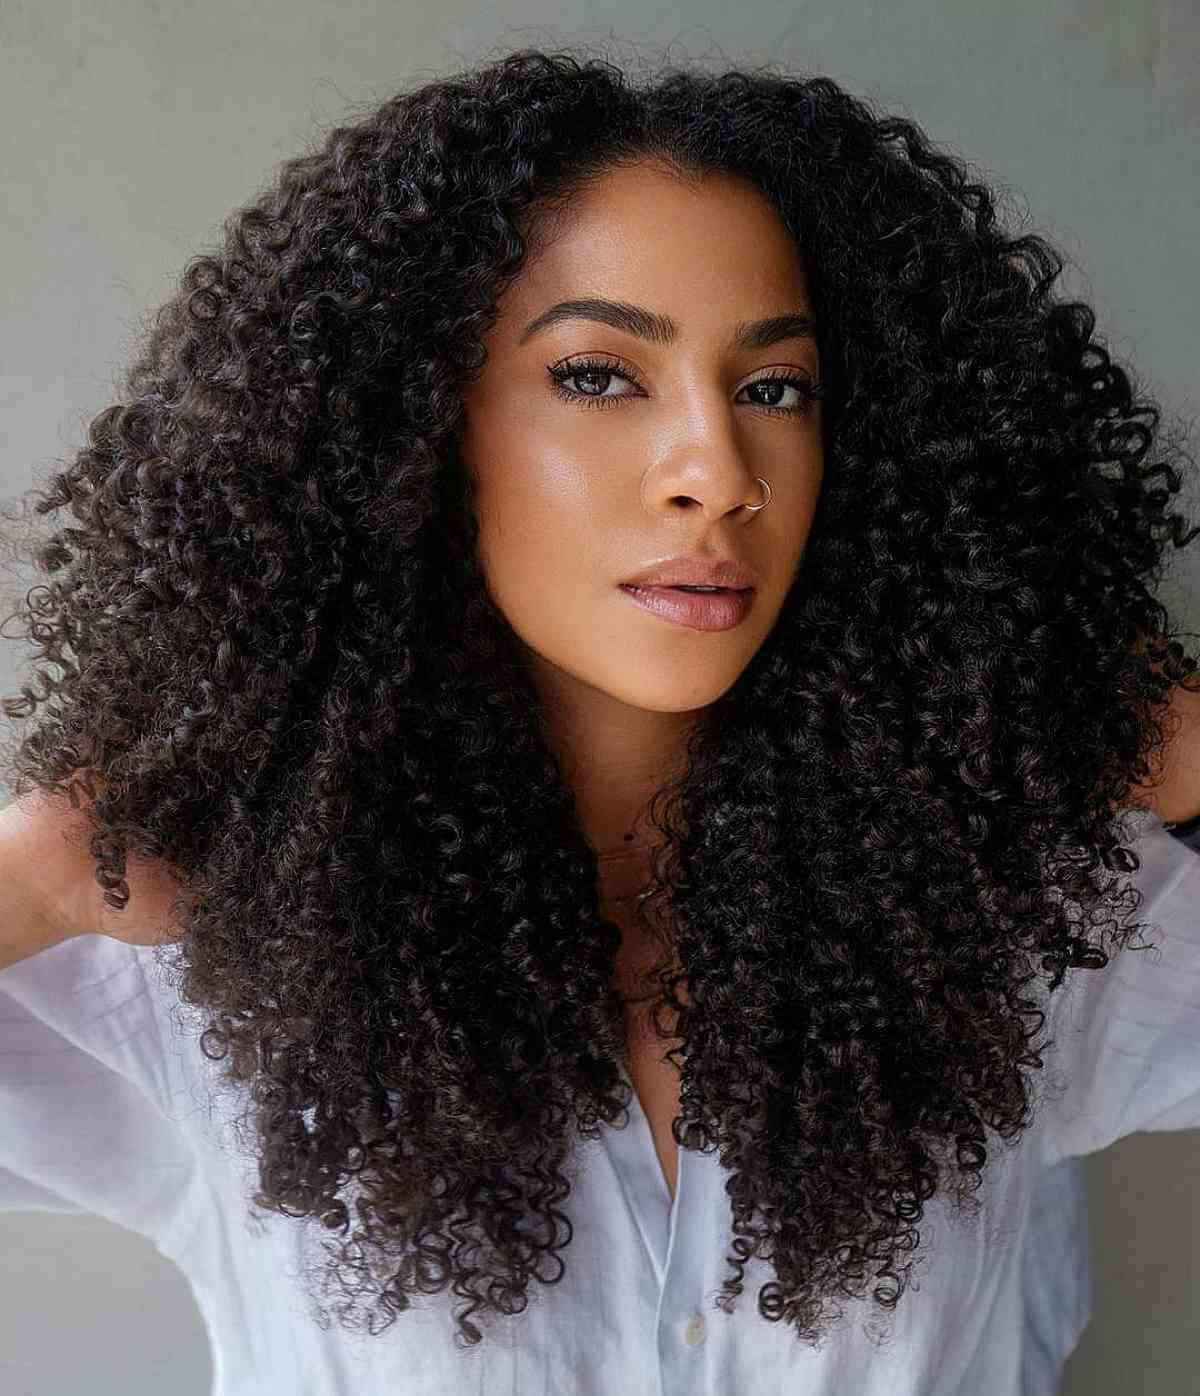 Full-Looking Natural Curls for African-American Women